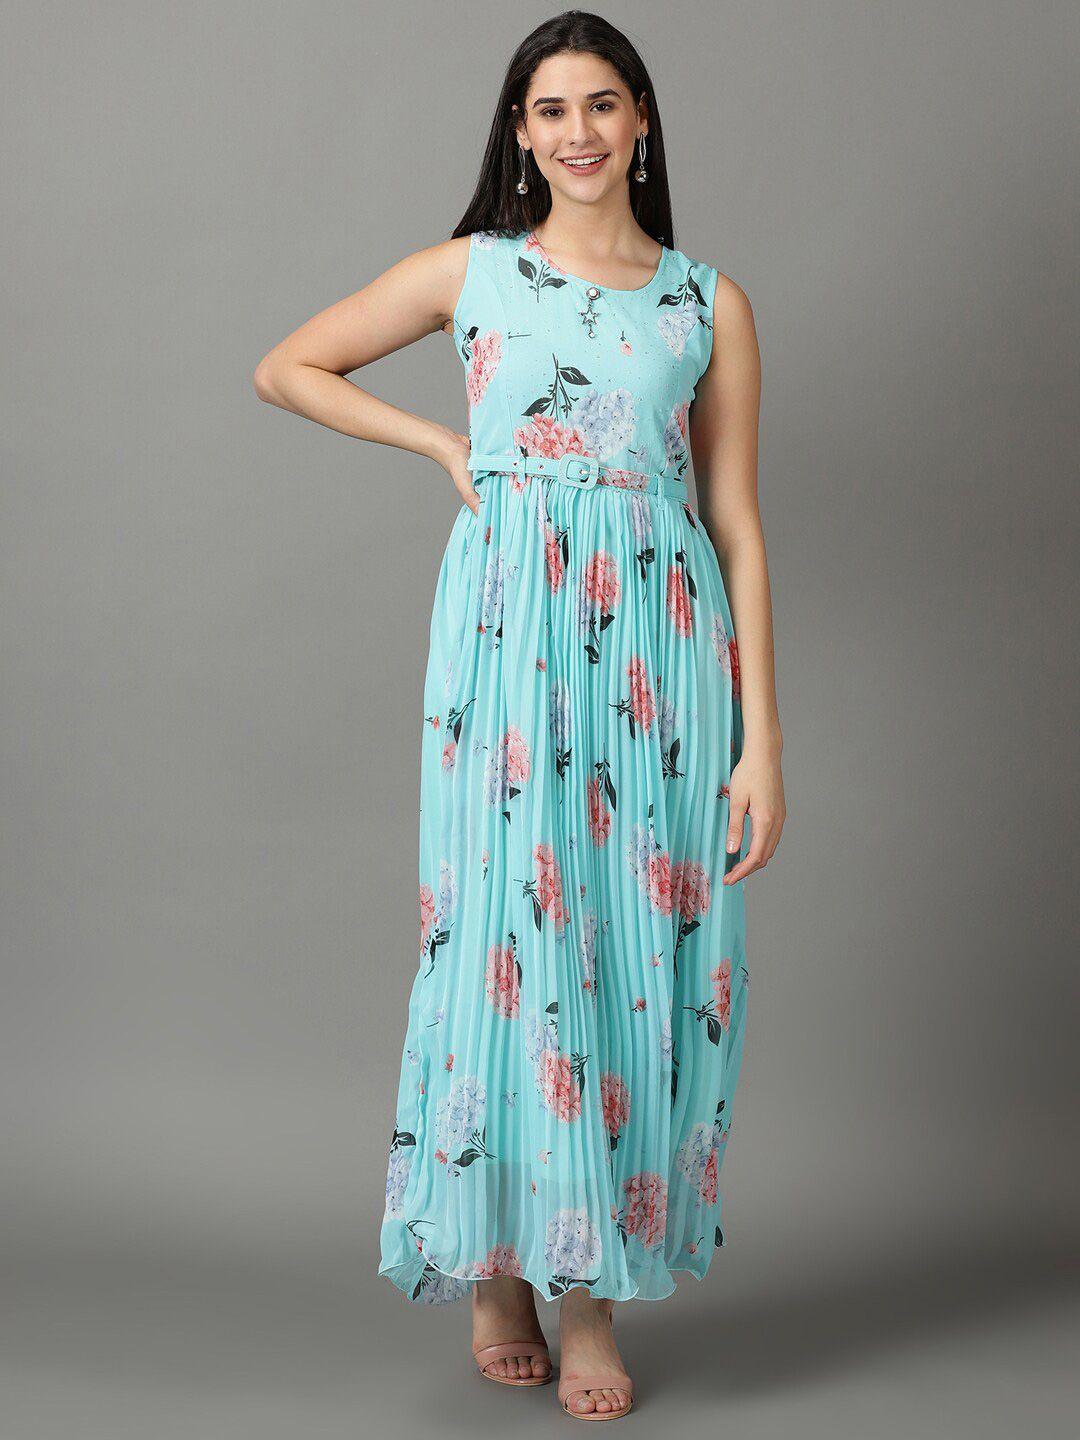 showoff-round-neck-floral-printed-accordion-pleats-chiffon-maxi-dress-with-belt